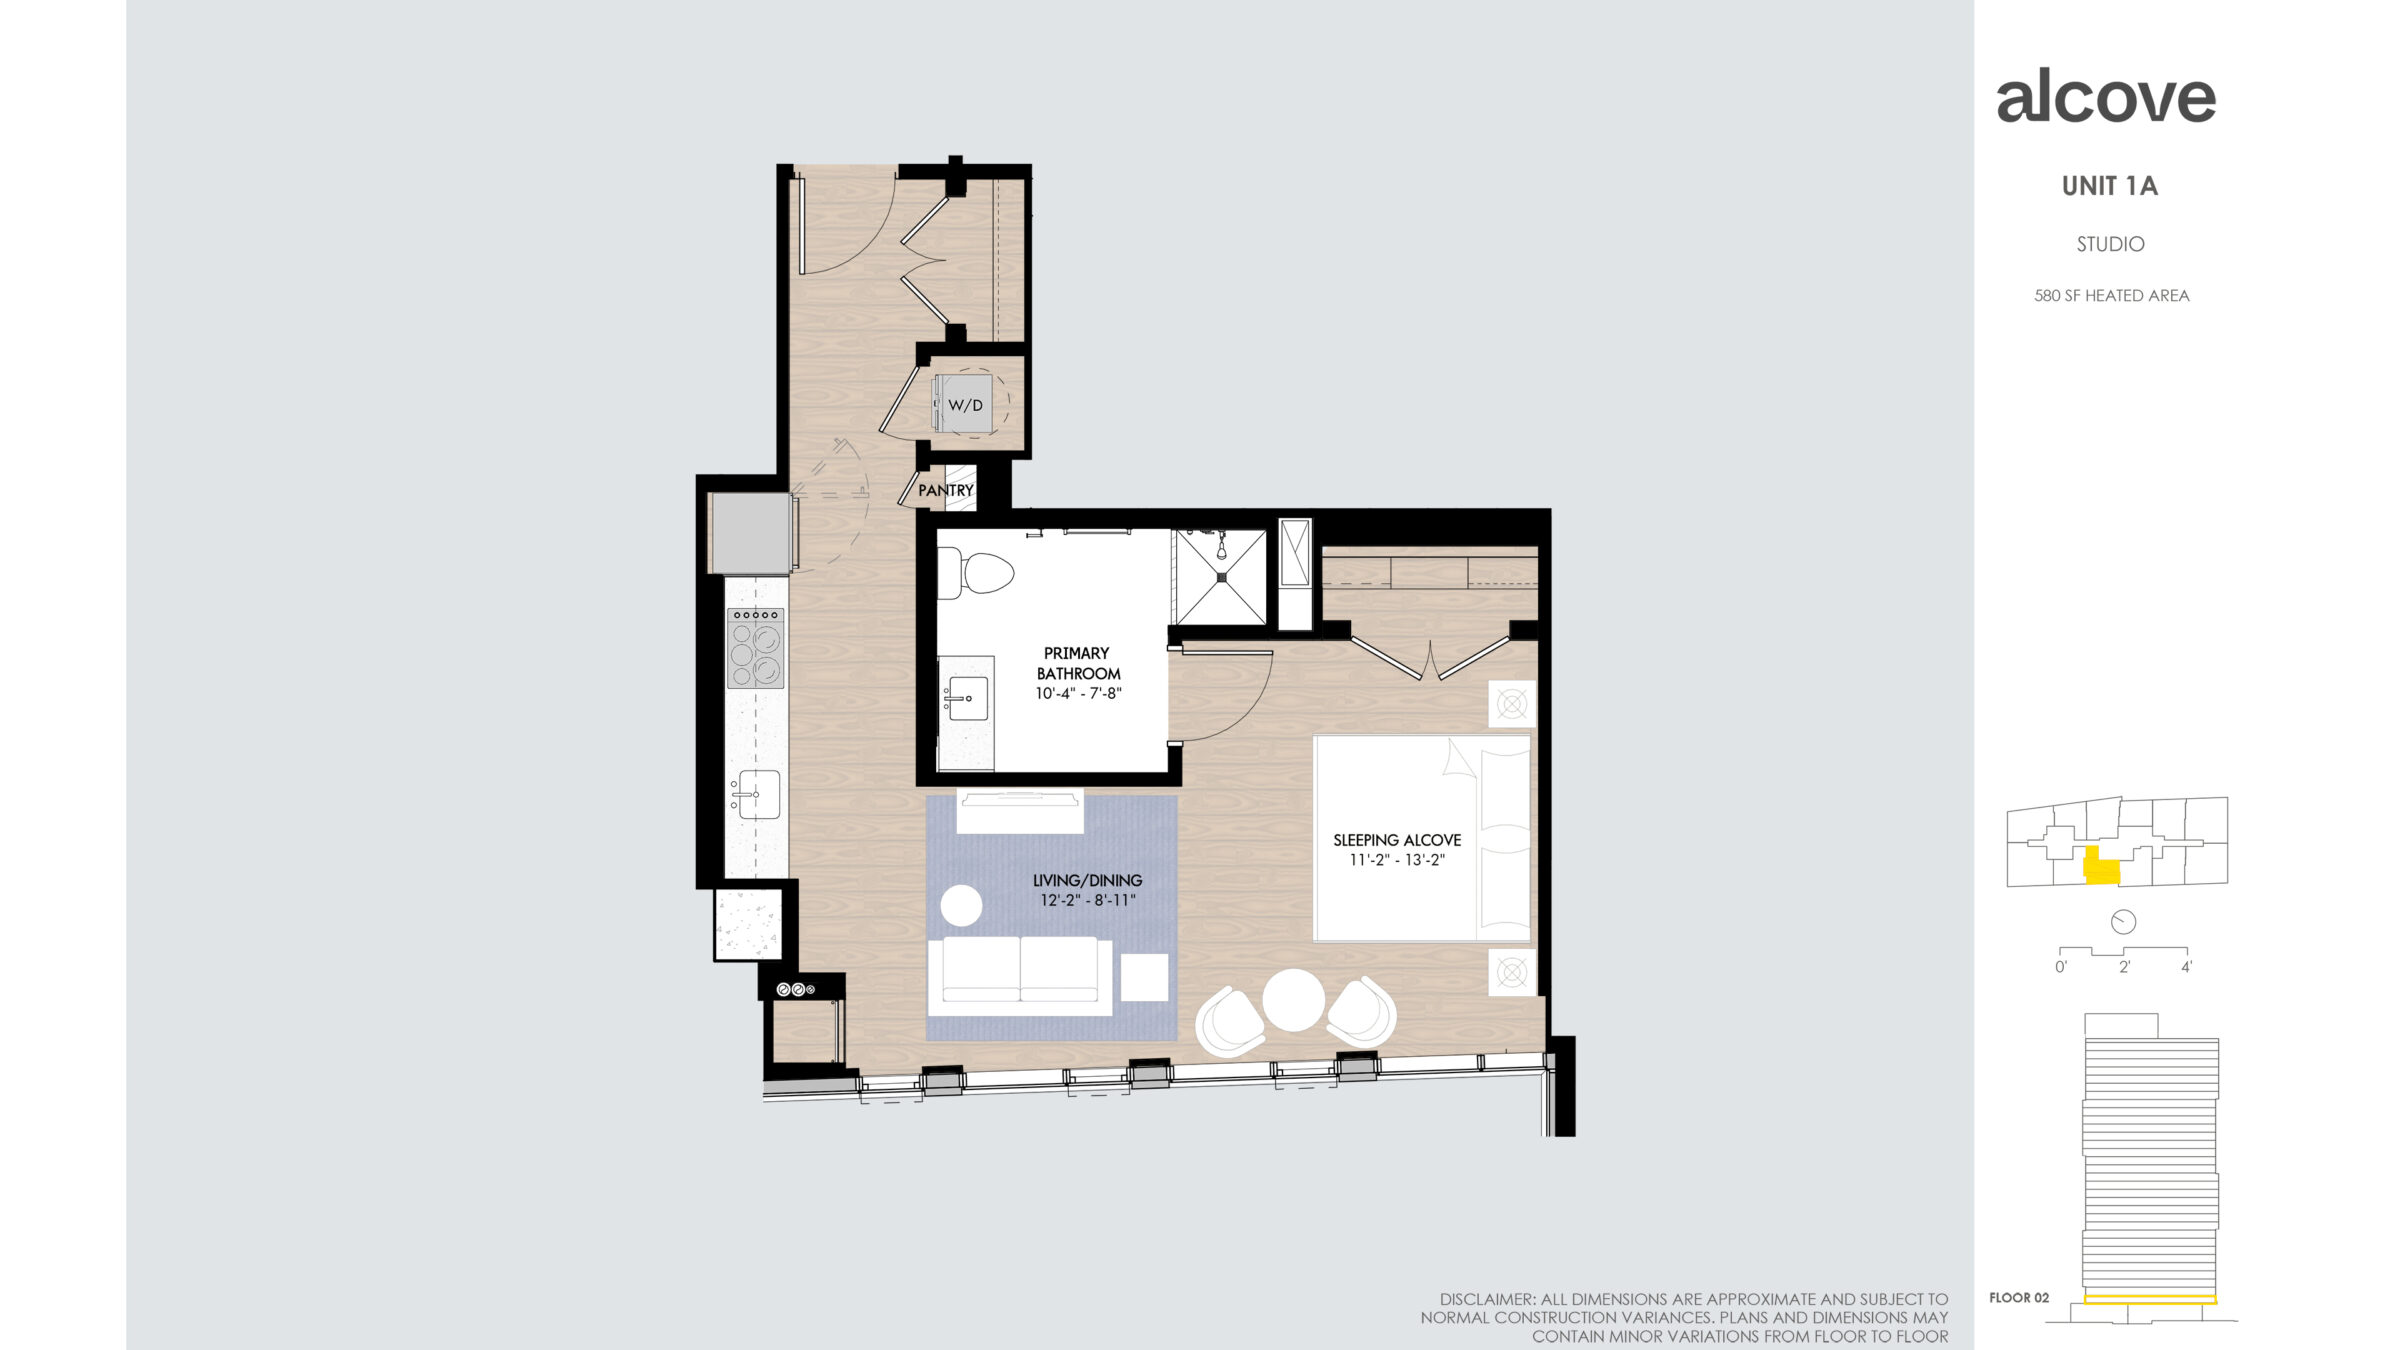 Image reads: UNIT 1A STUDIO 580 SF HEATED AREA. Disclaimer: all dimensions are approximate and subject to normal construction variances. Plans and dimensions may contain minor variations from floor to floor.